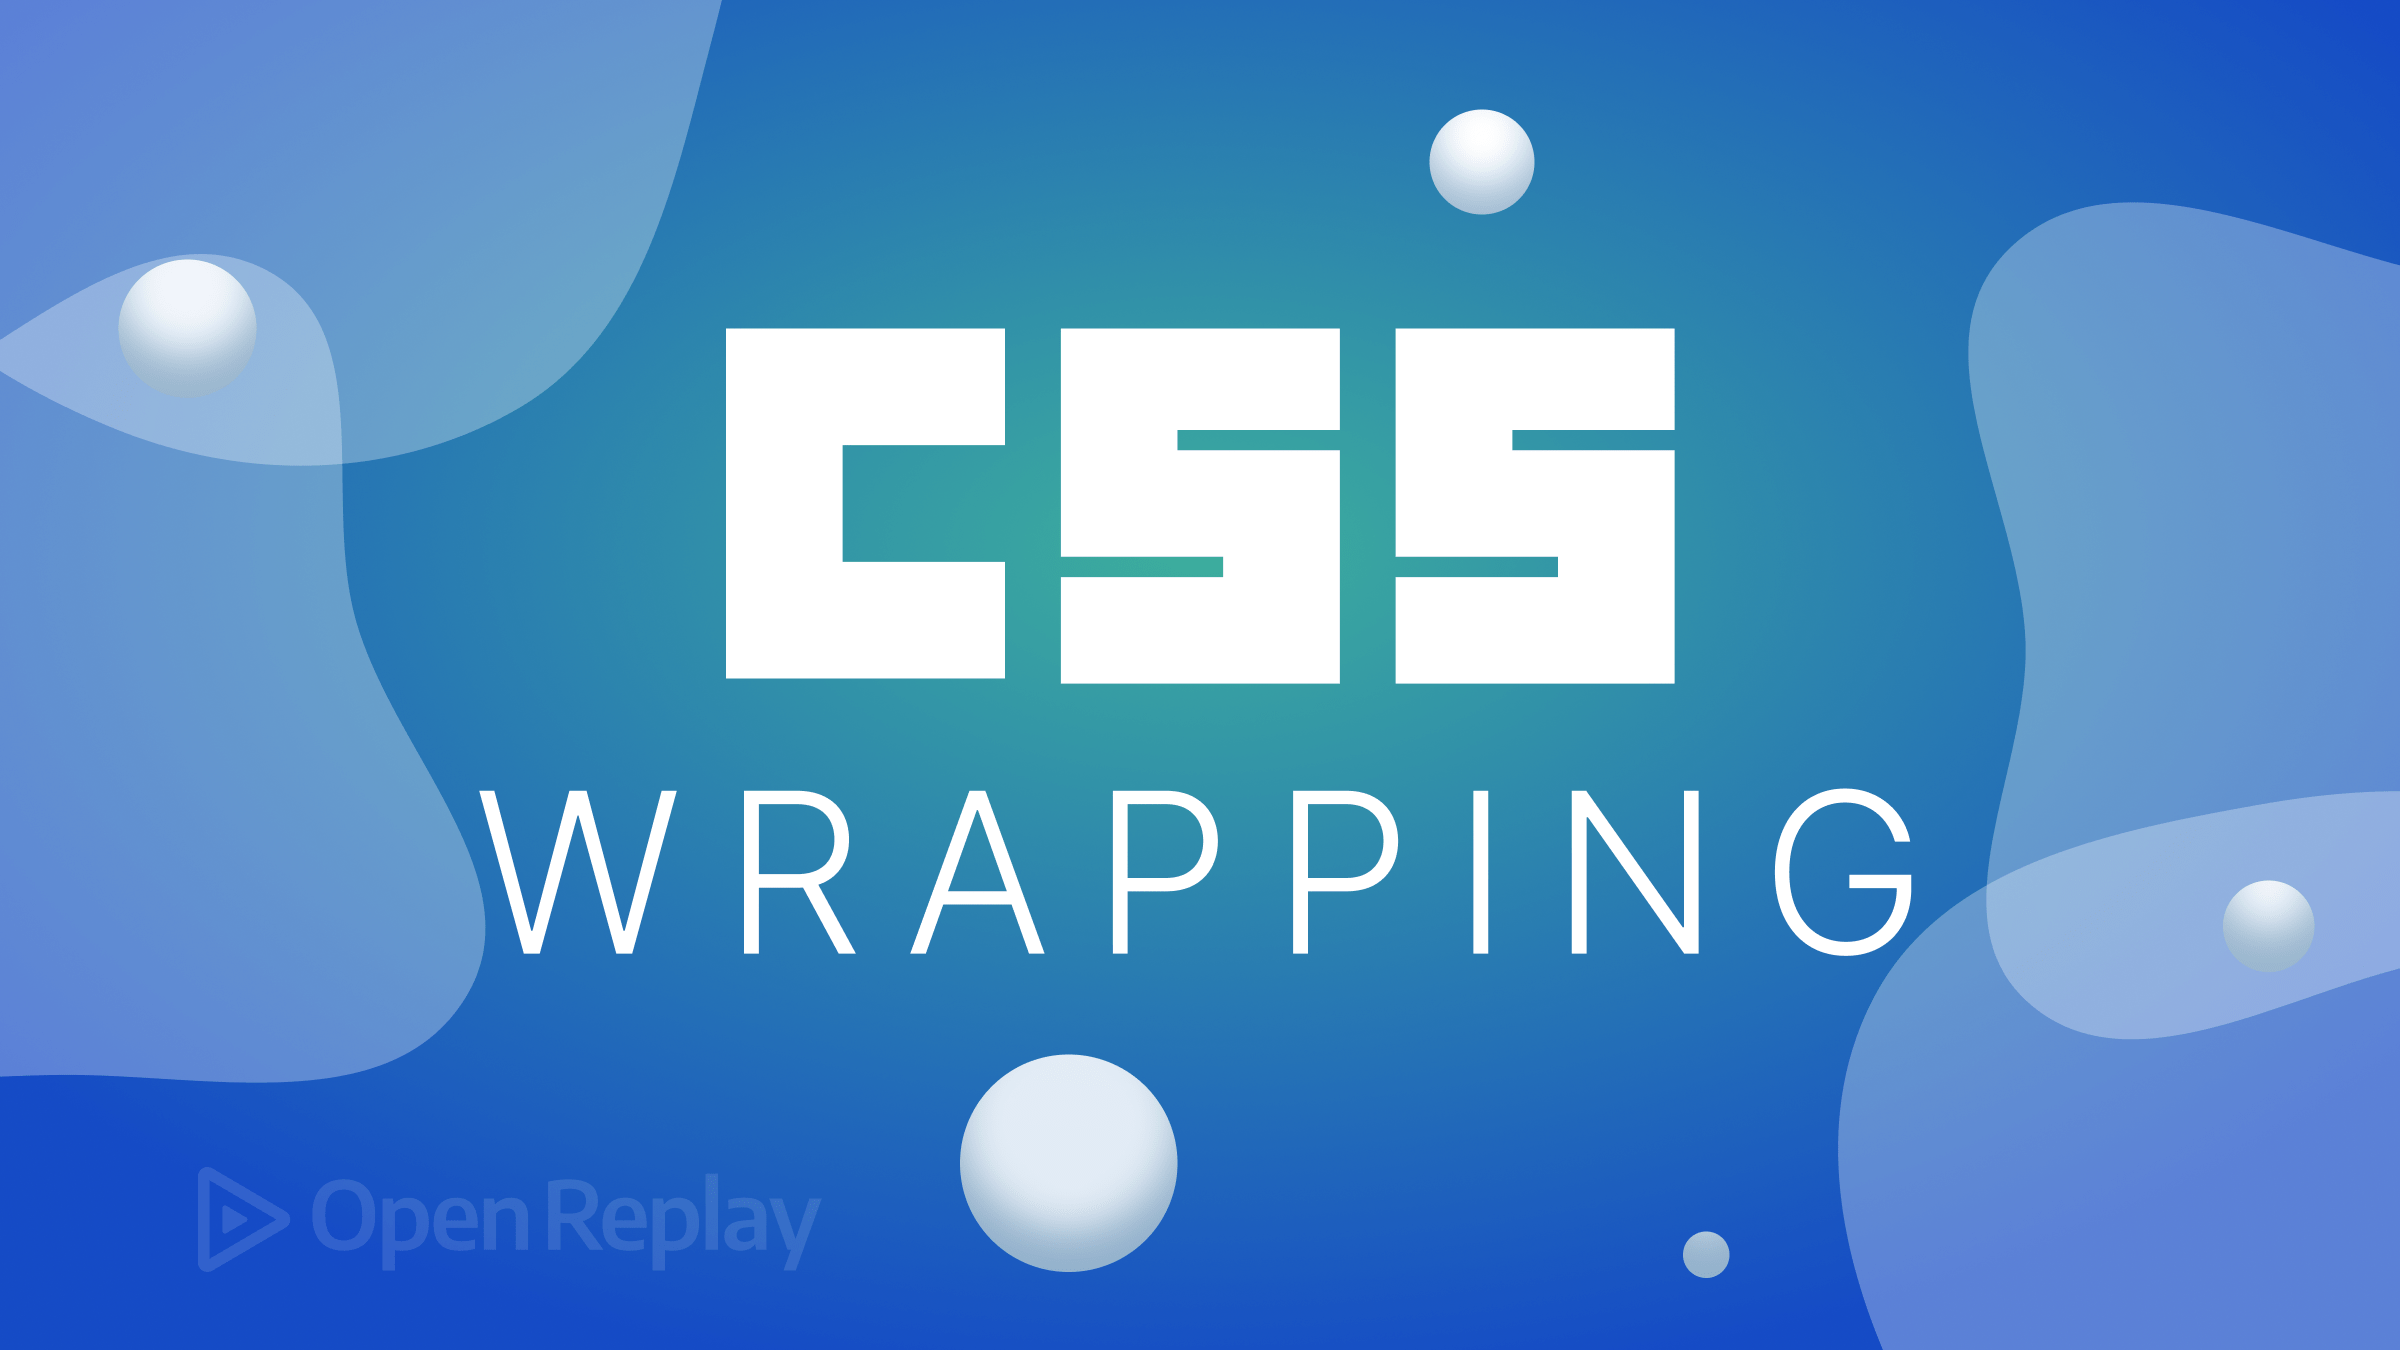 CSS wrapping made easy